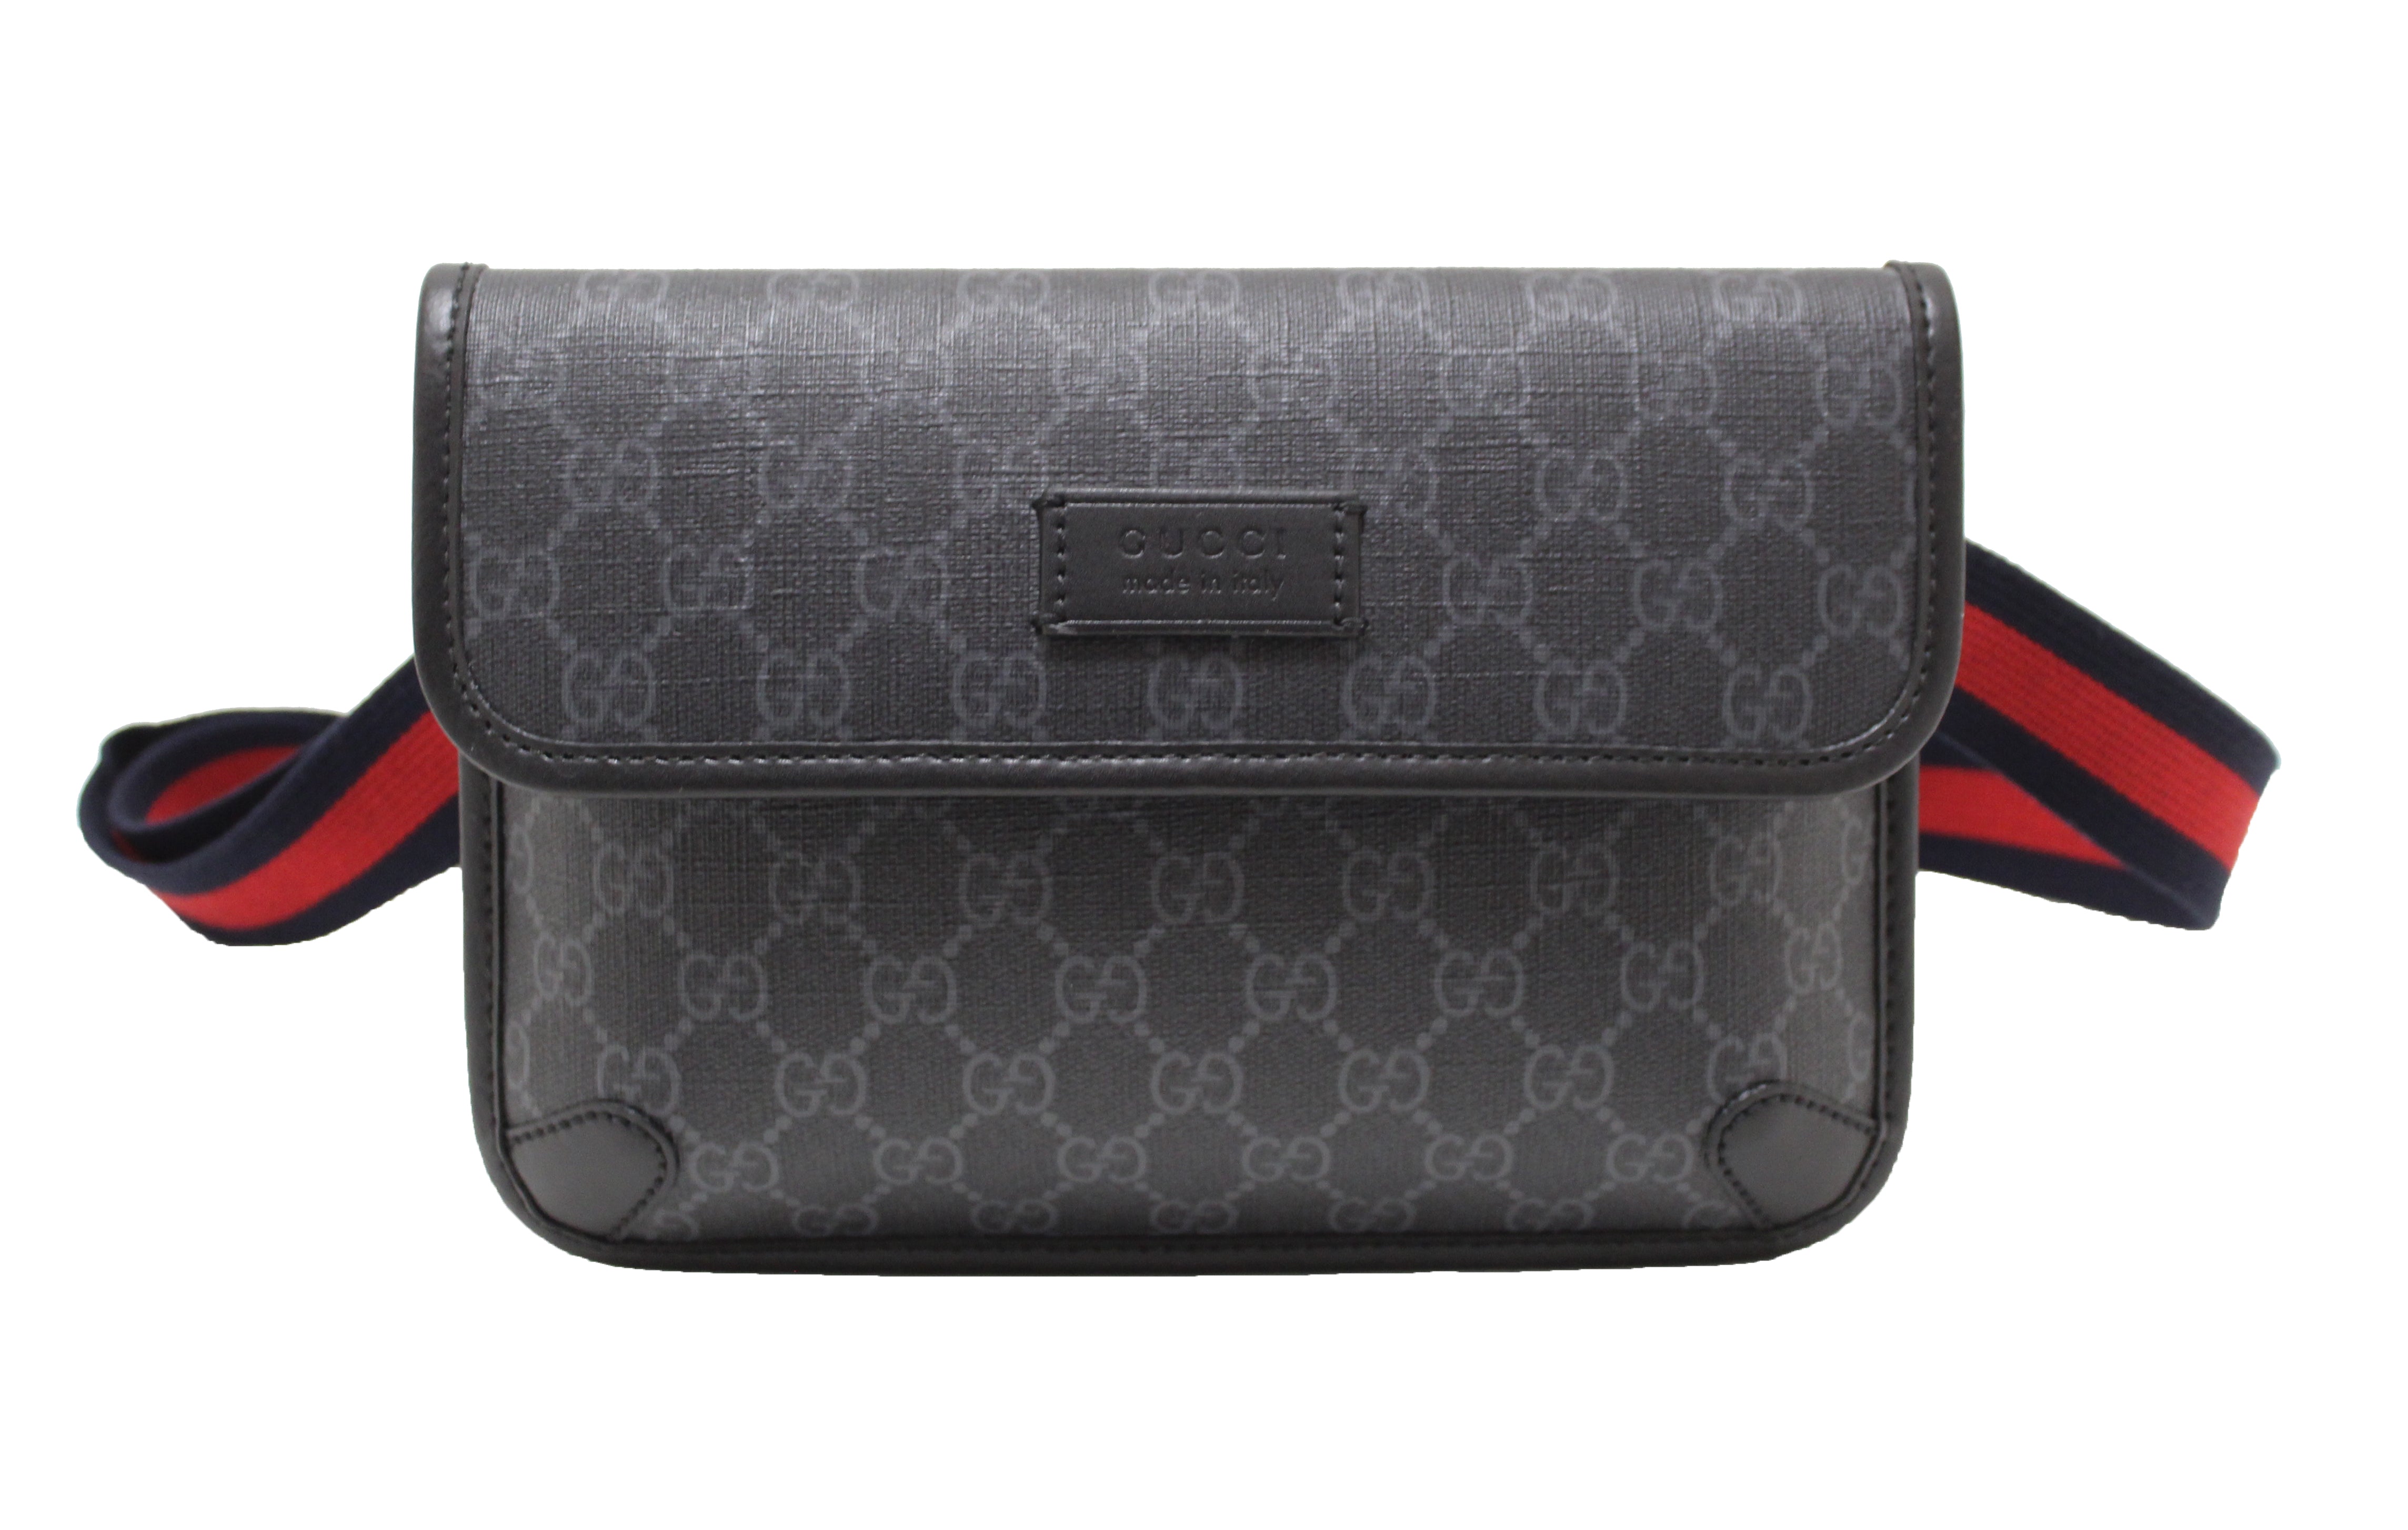 Men's GUCCI Belt Bags Sale, Up To 70% Off